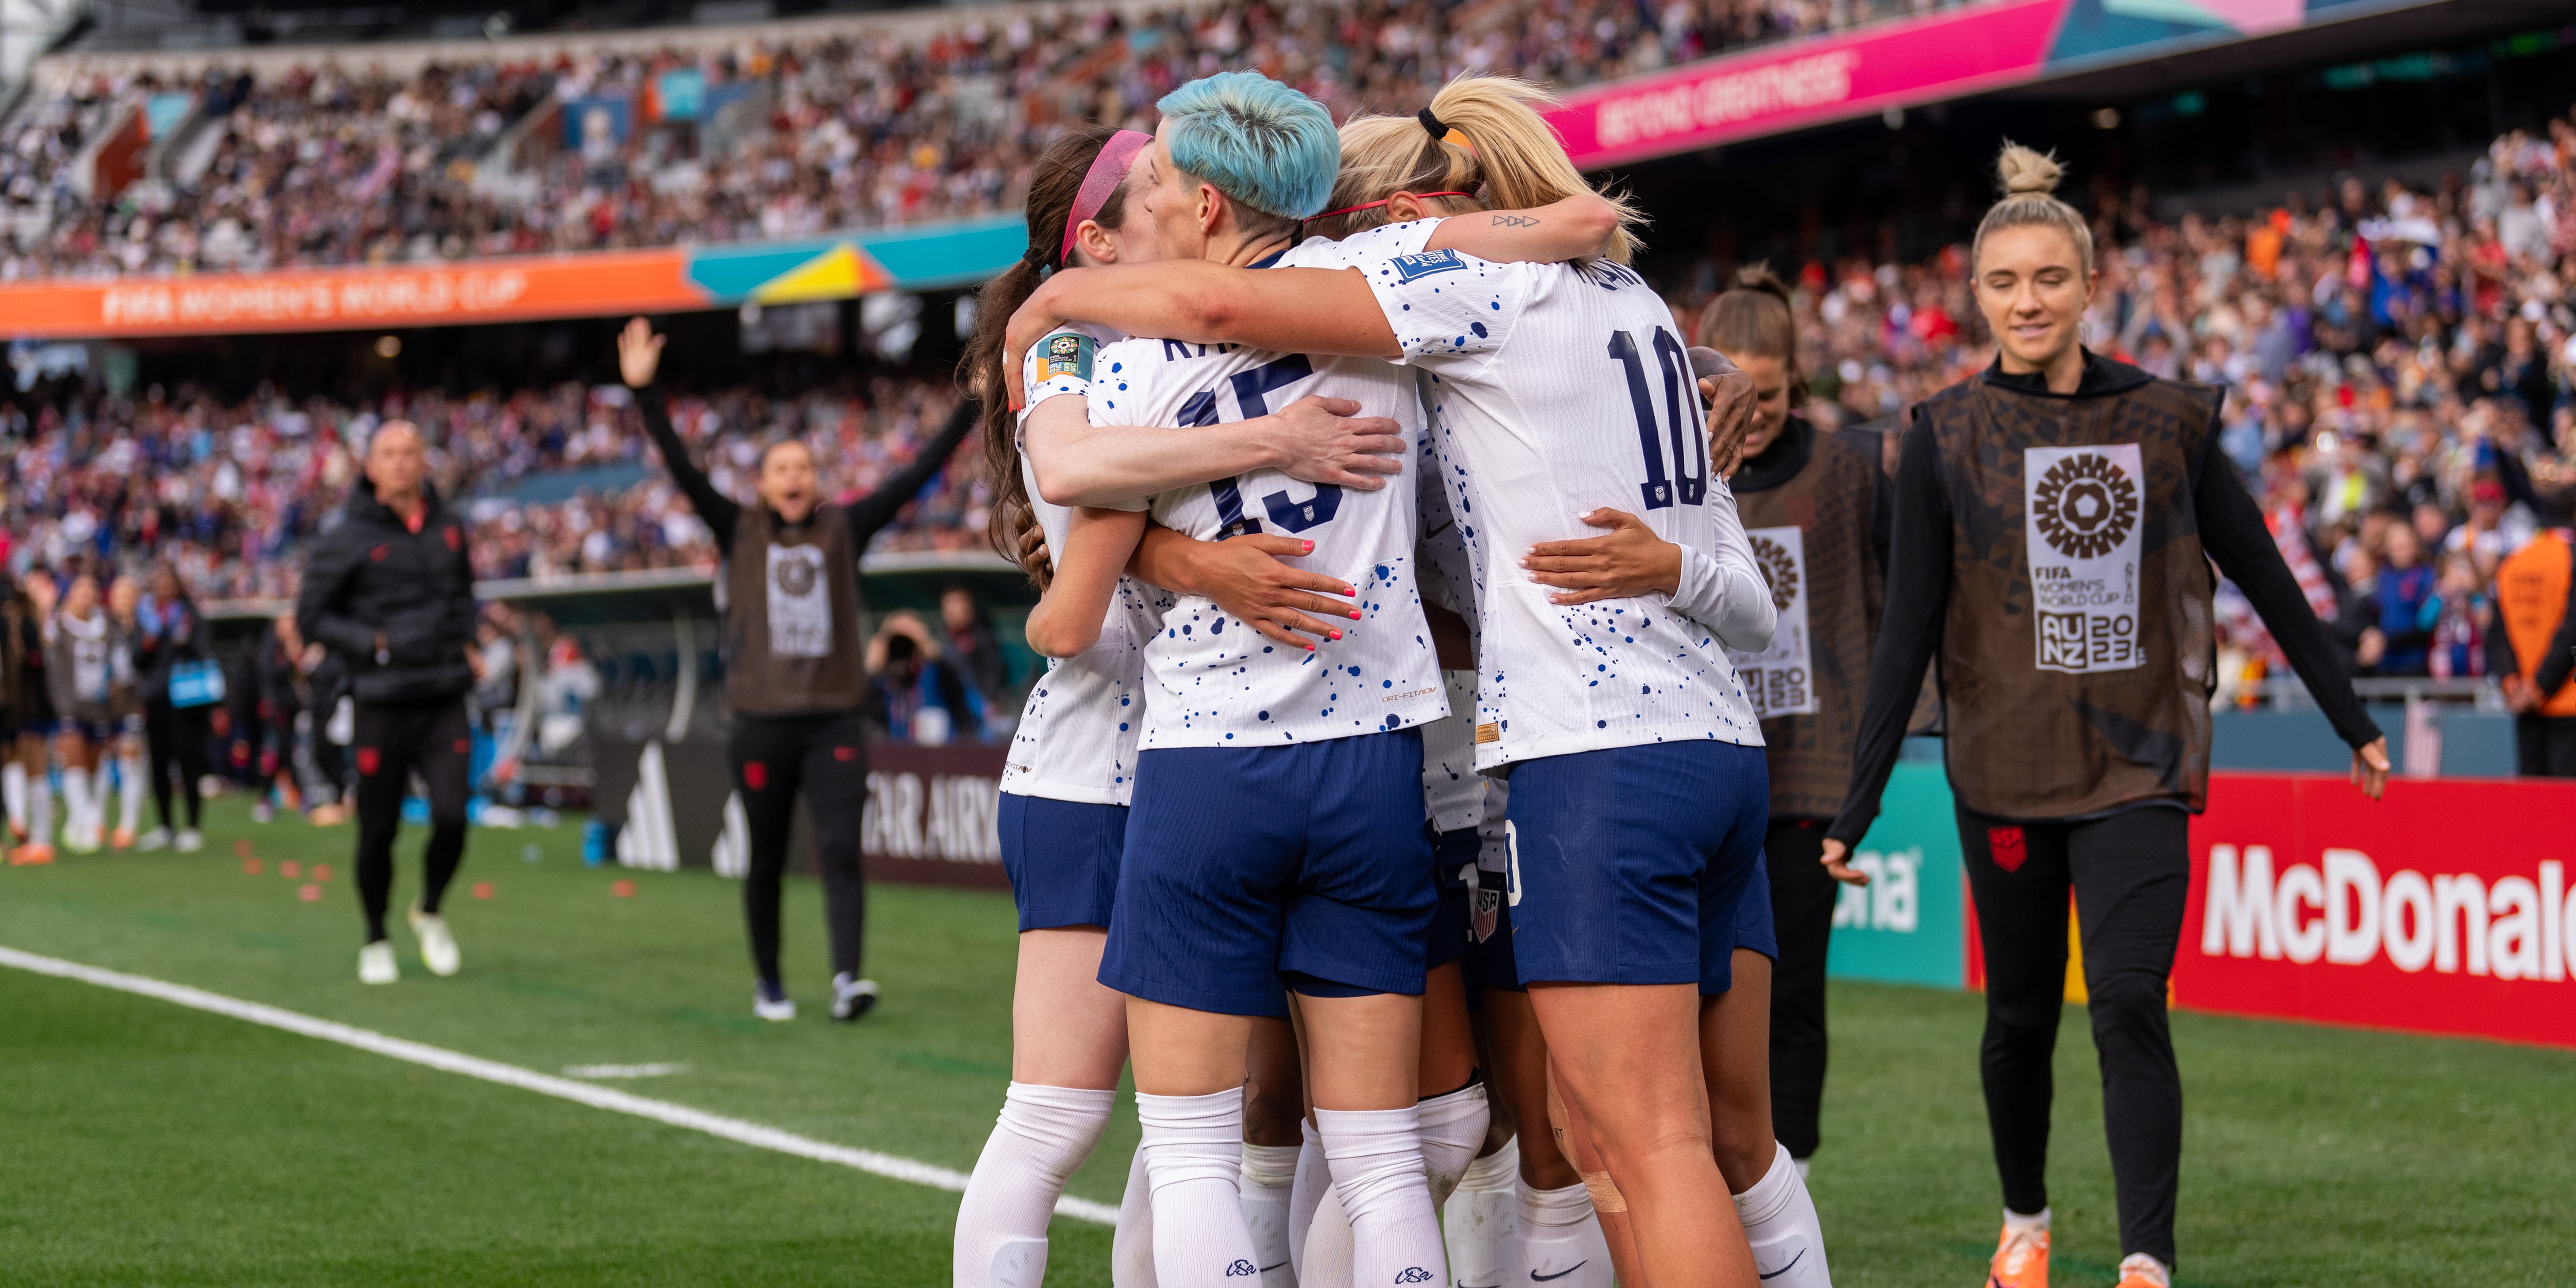 Nike Sells Record Number of USA Soccer Jerseys Due to Women's World Cup